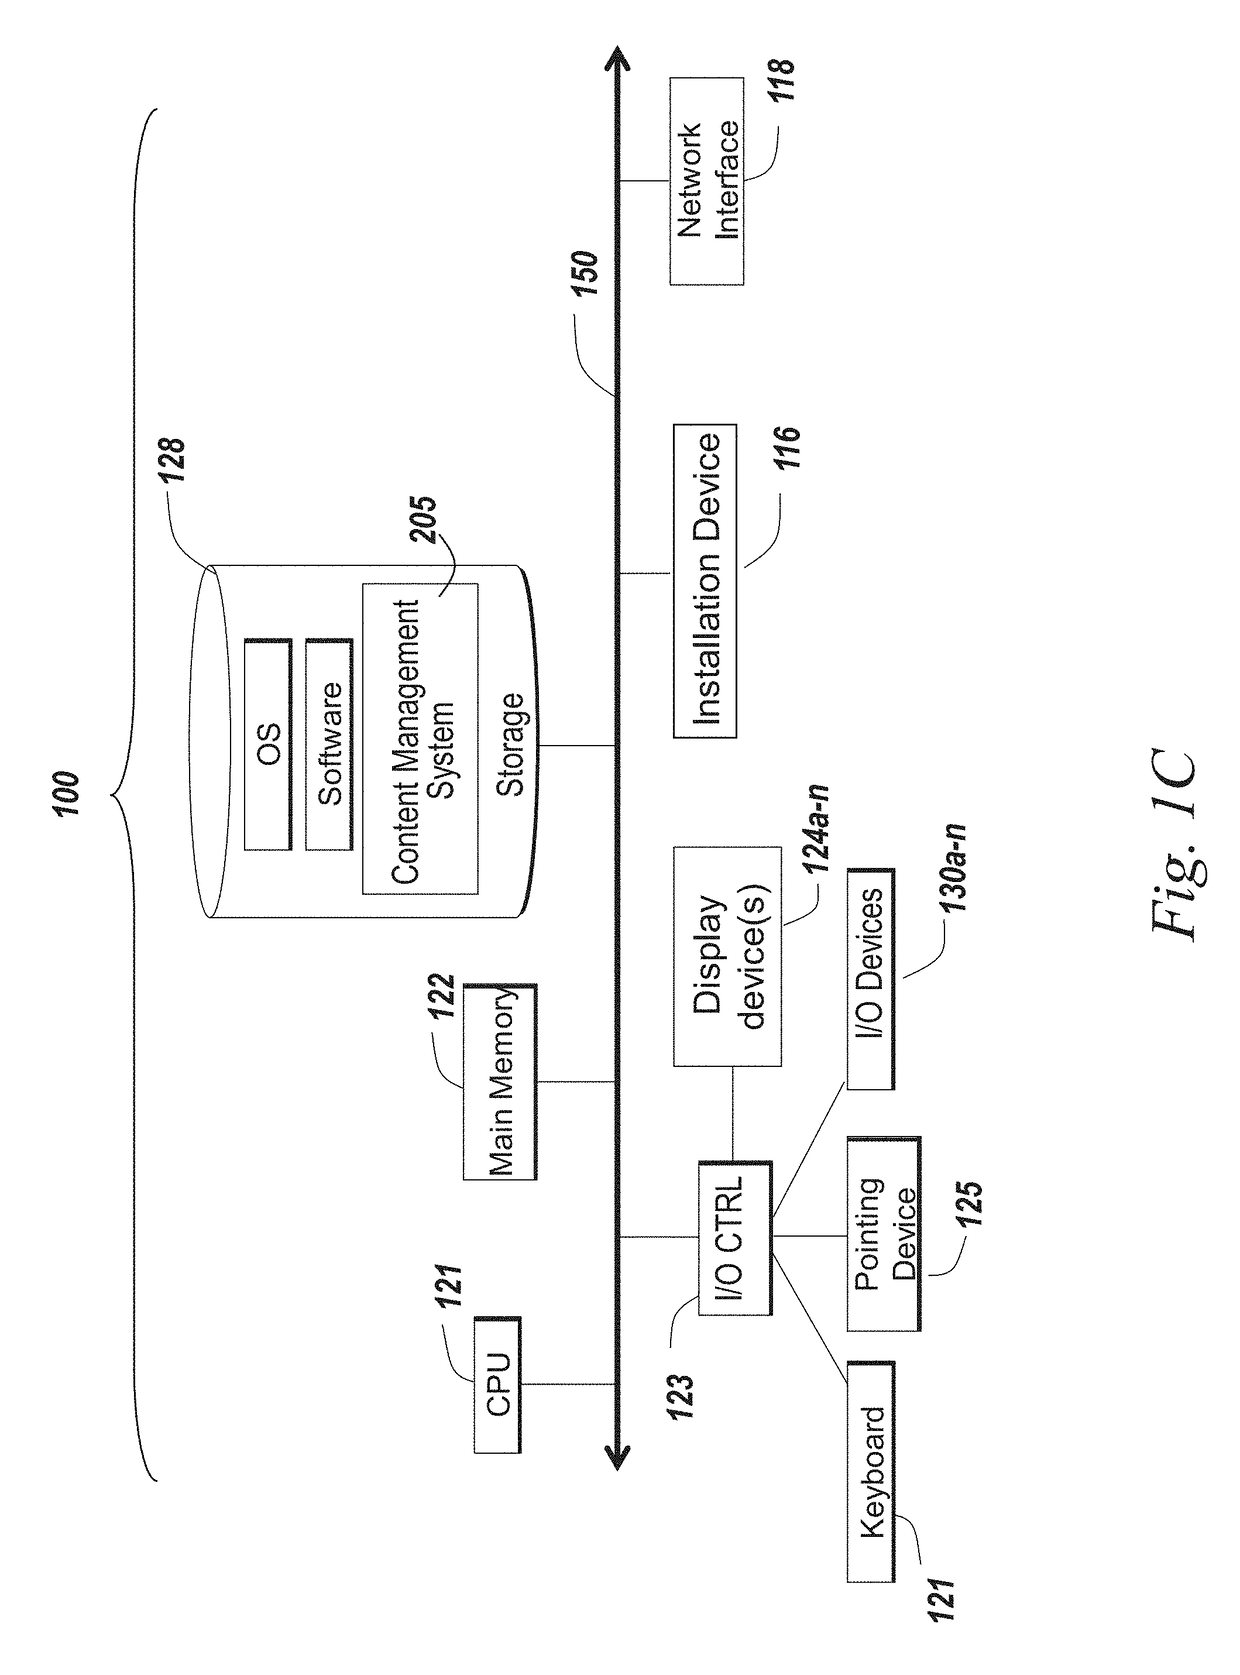 Systems and methods for prioritizing content packets based on a dynamically updated list of content filtering rules